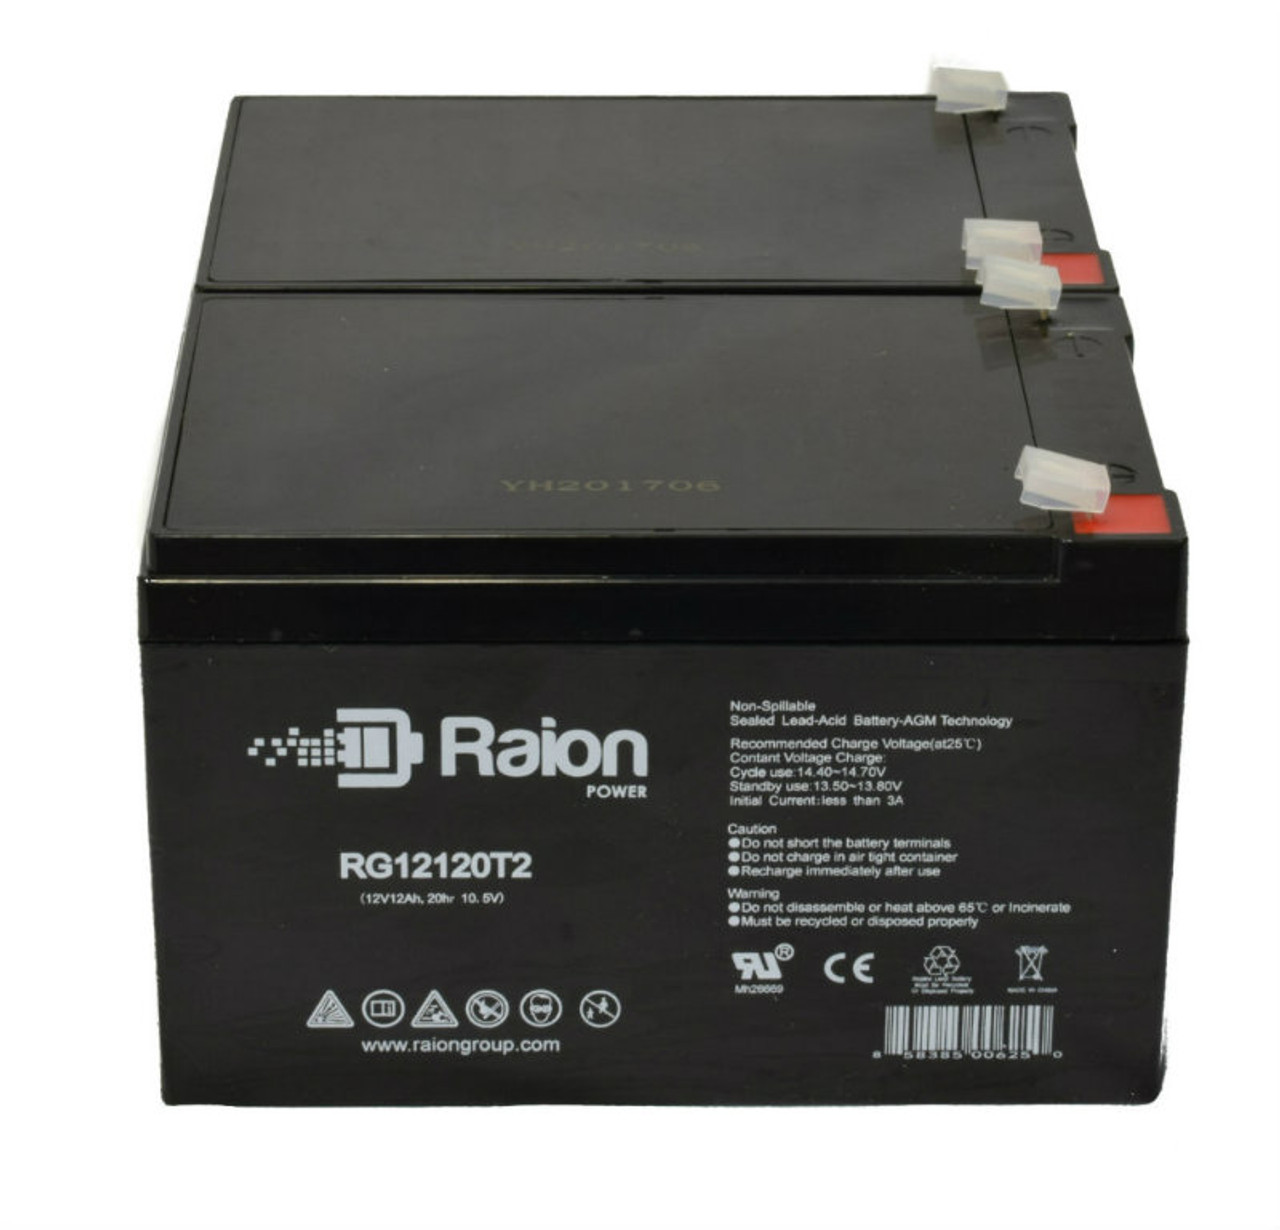 Raion Power RG12120T2 Replacement Fire Alarm Control Panel Battery for Altronix AL802ULADA - 2 Pack